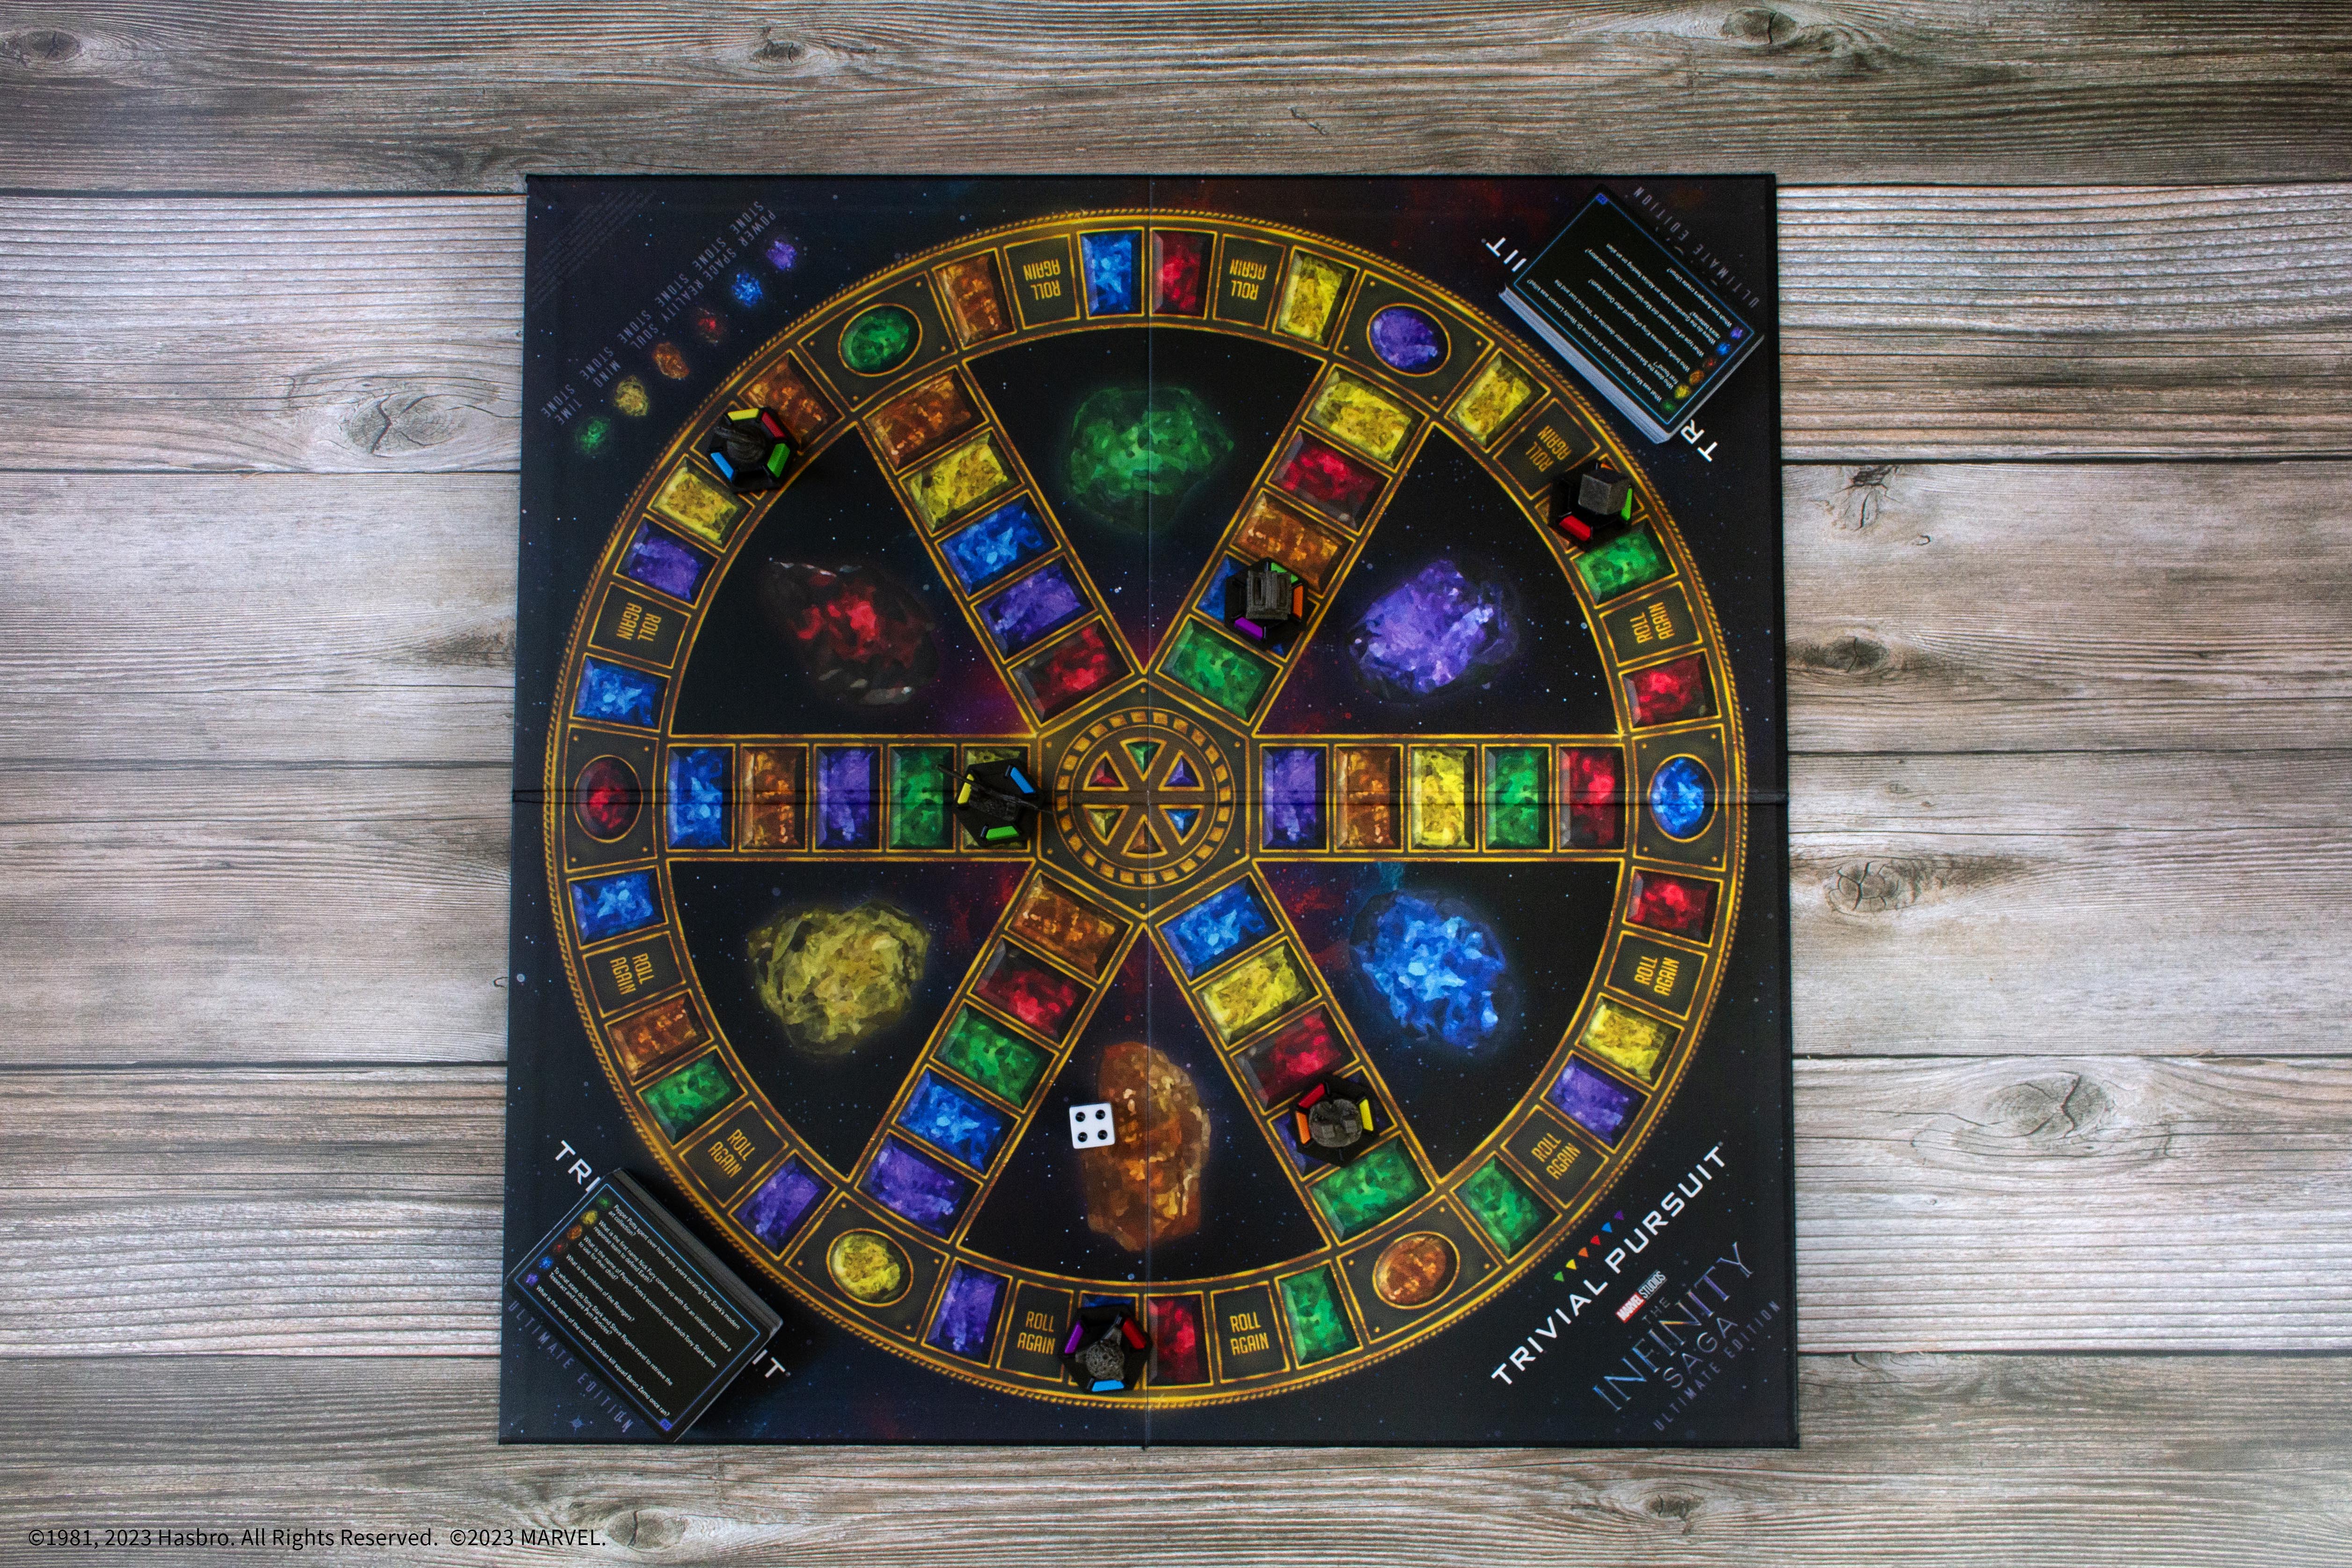 TRIVIAL PURSUIT®: World of Harry Potter™ Ultimate Edition – The Op